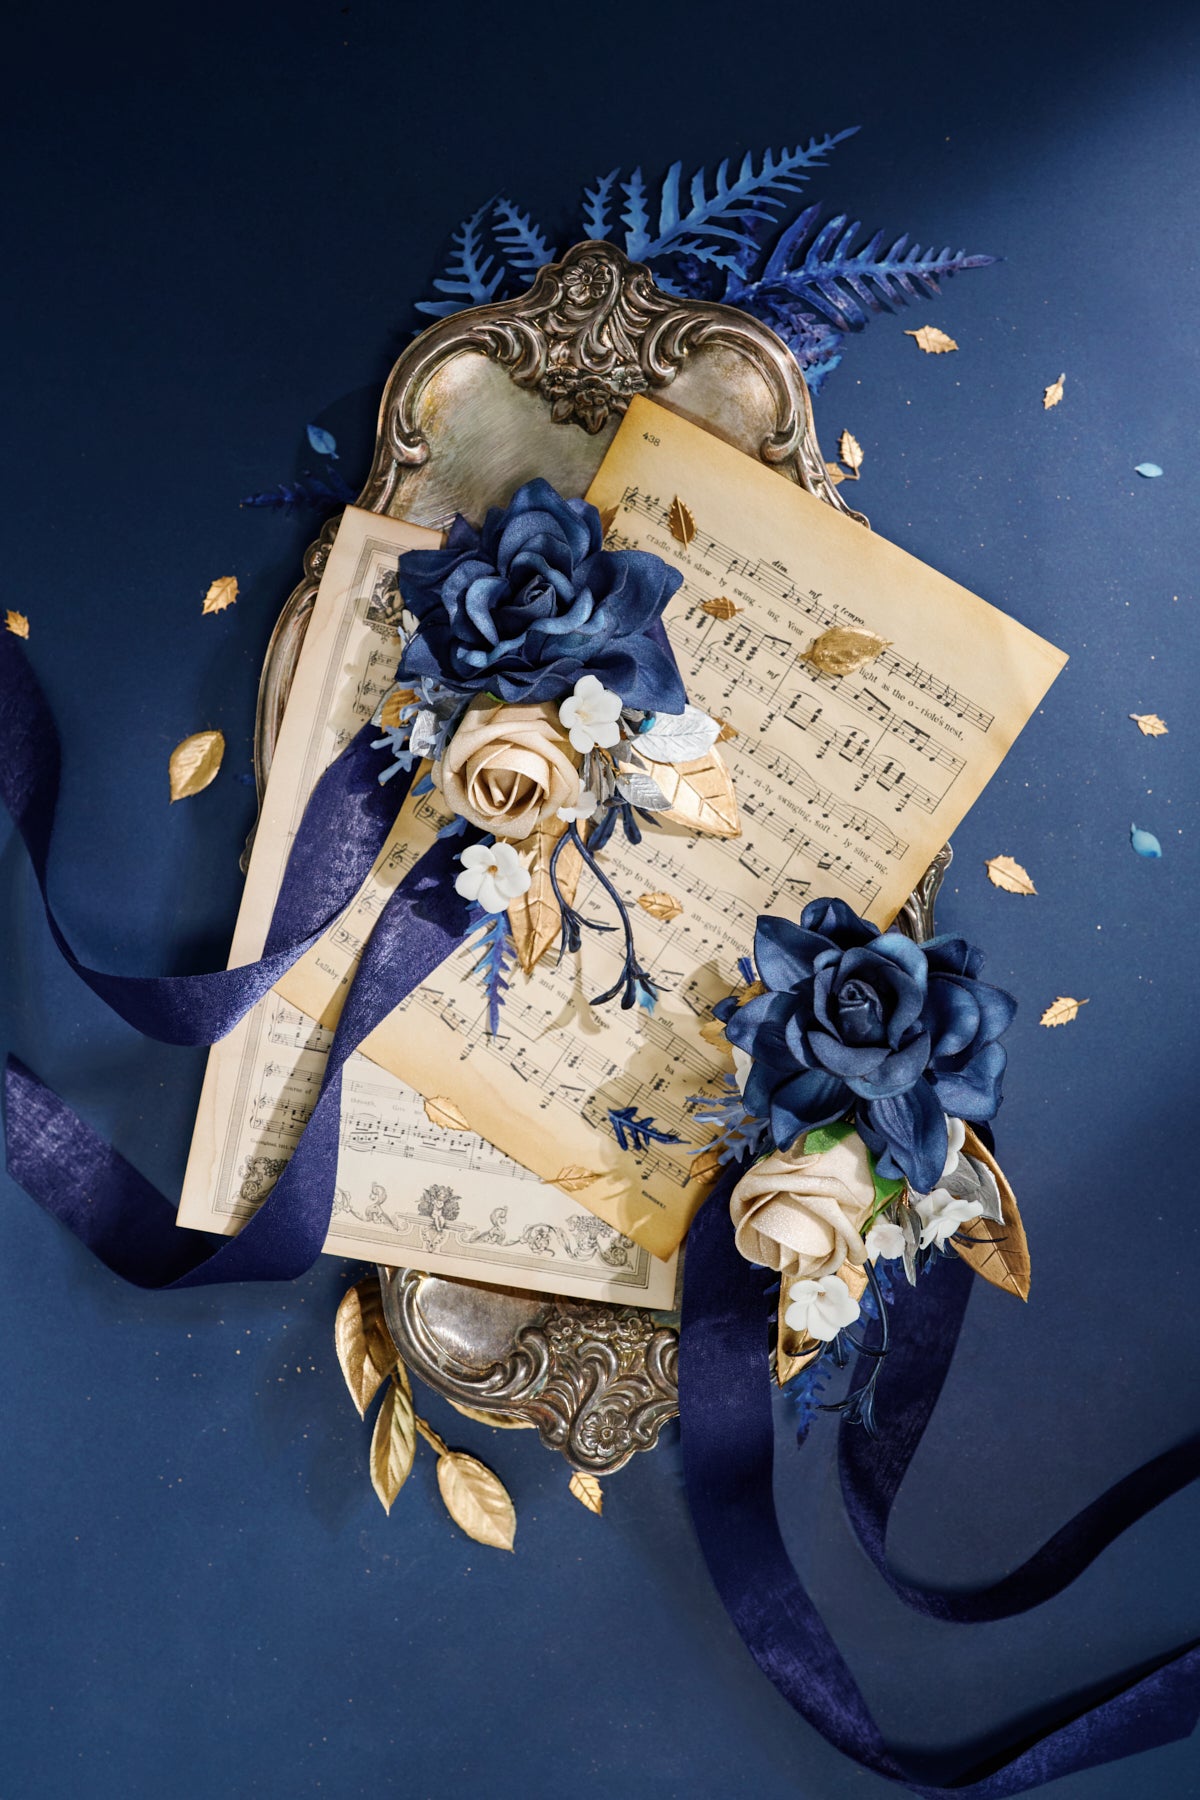 Wrist and Shoulder Corsages in Stately Navy & Gold